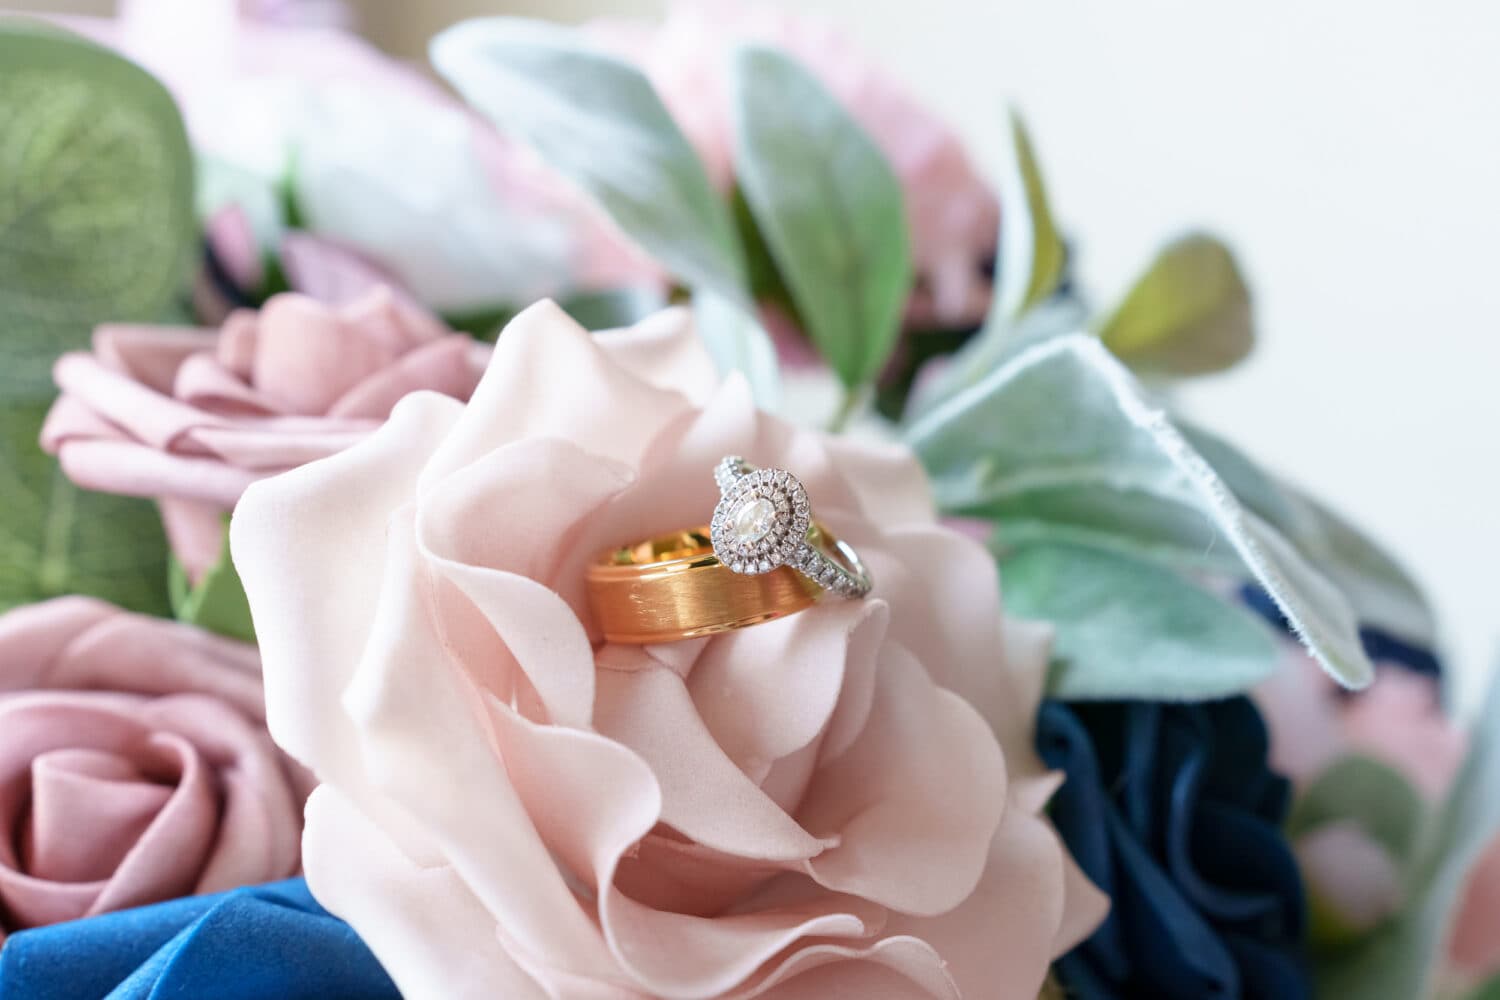 Detail shots of flowers and rings - Hotel Indigo